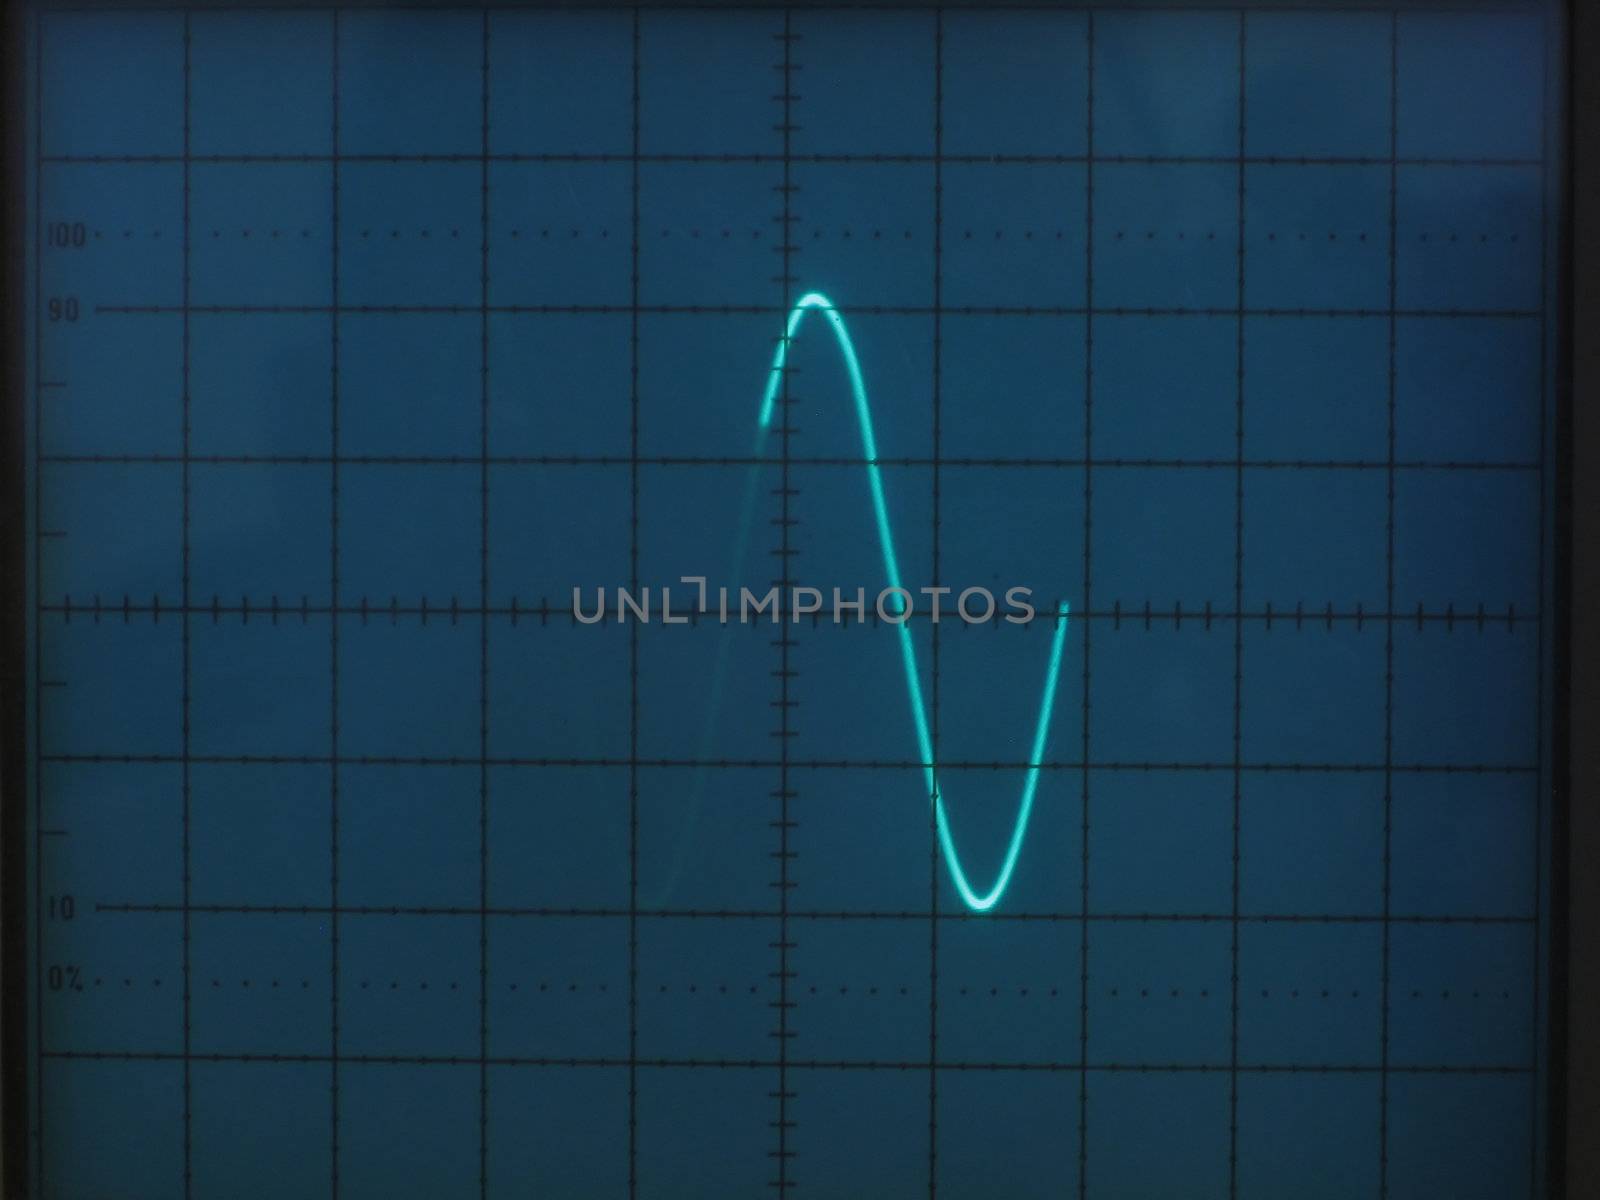 electrical signals displayed on the screen of an oscilloscope